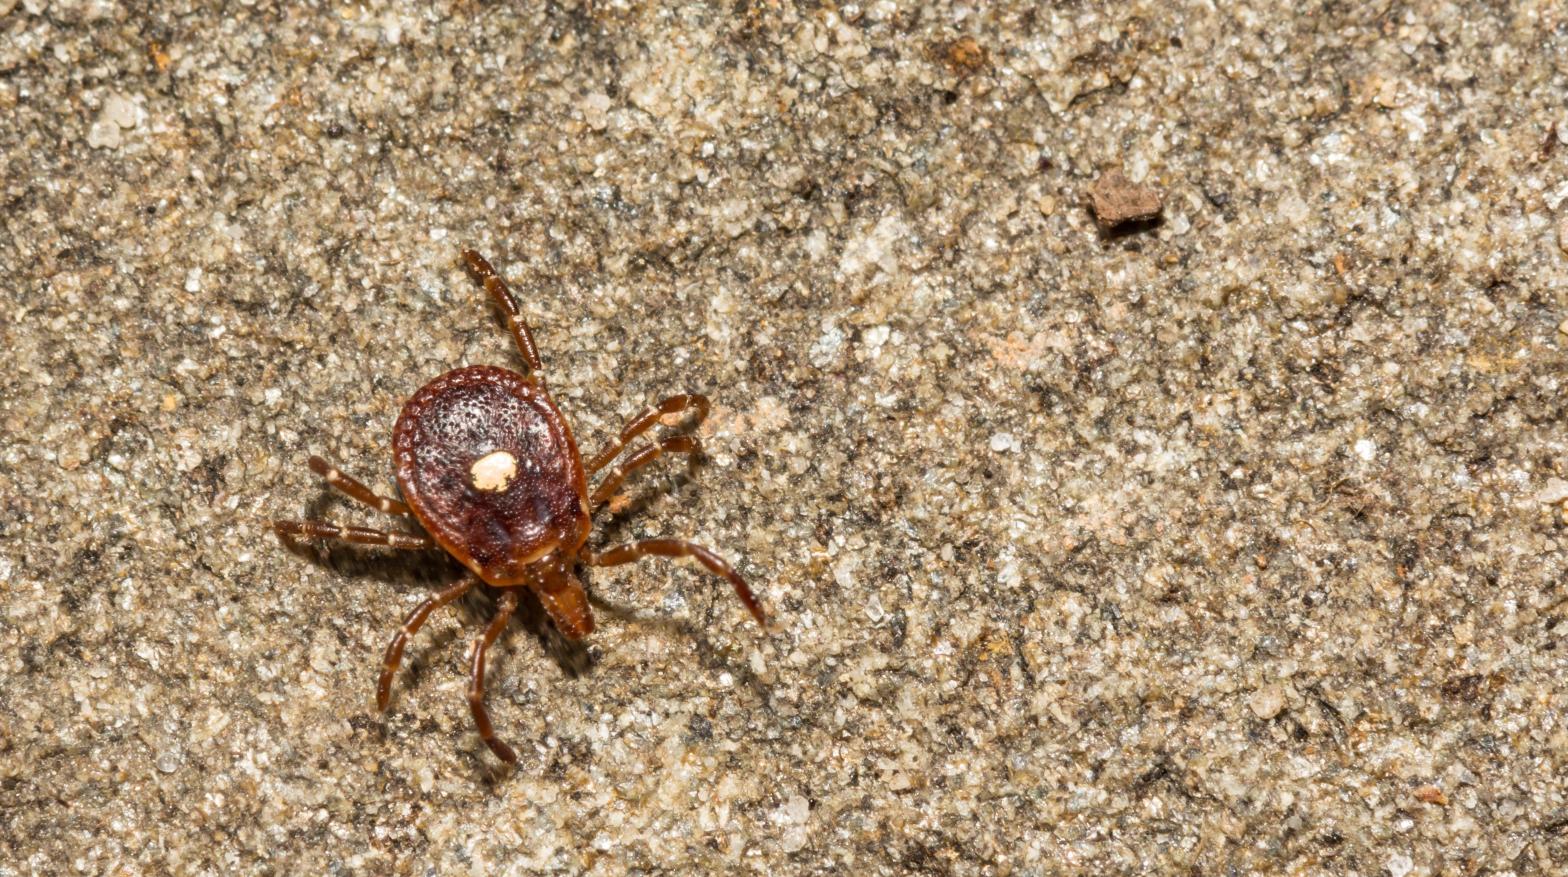 The Lone Star tick (Amblyomma americanum) is known to spread several infectious diseases, including the Heartland virus. (Image: Shutterstock, Shutterstock)